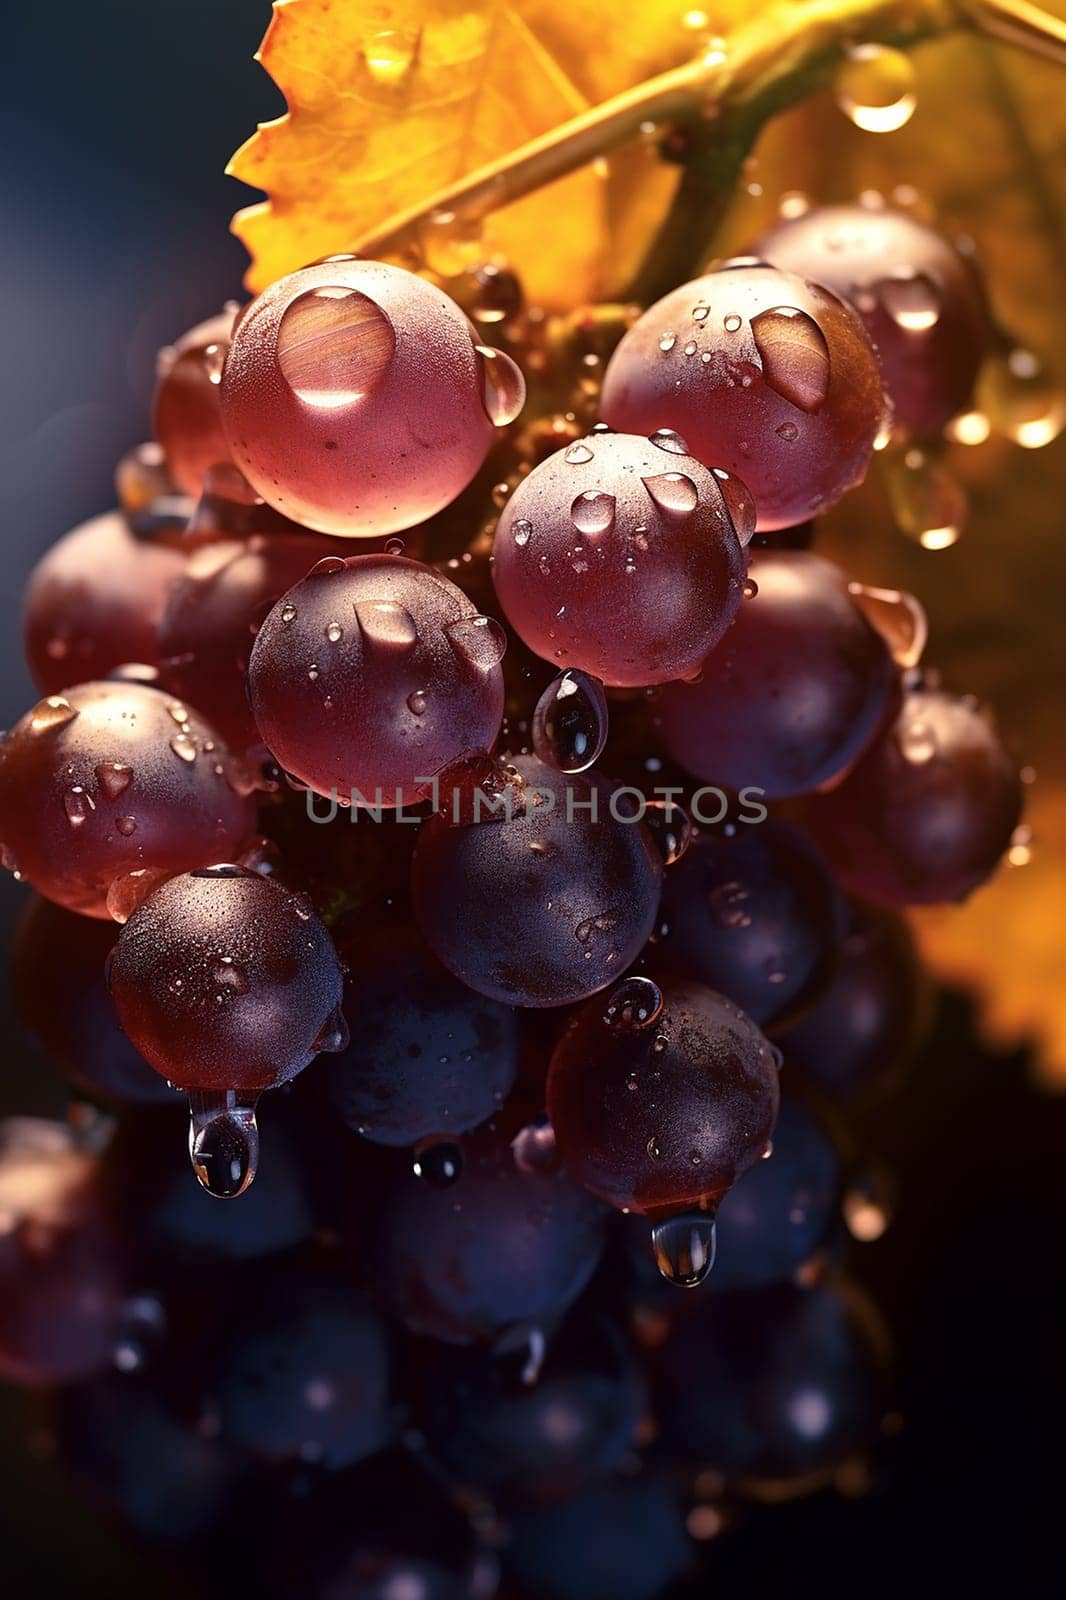 Close-up of ripe grapes with dew drops against a warm bokeh background.